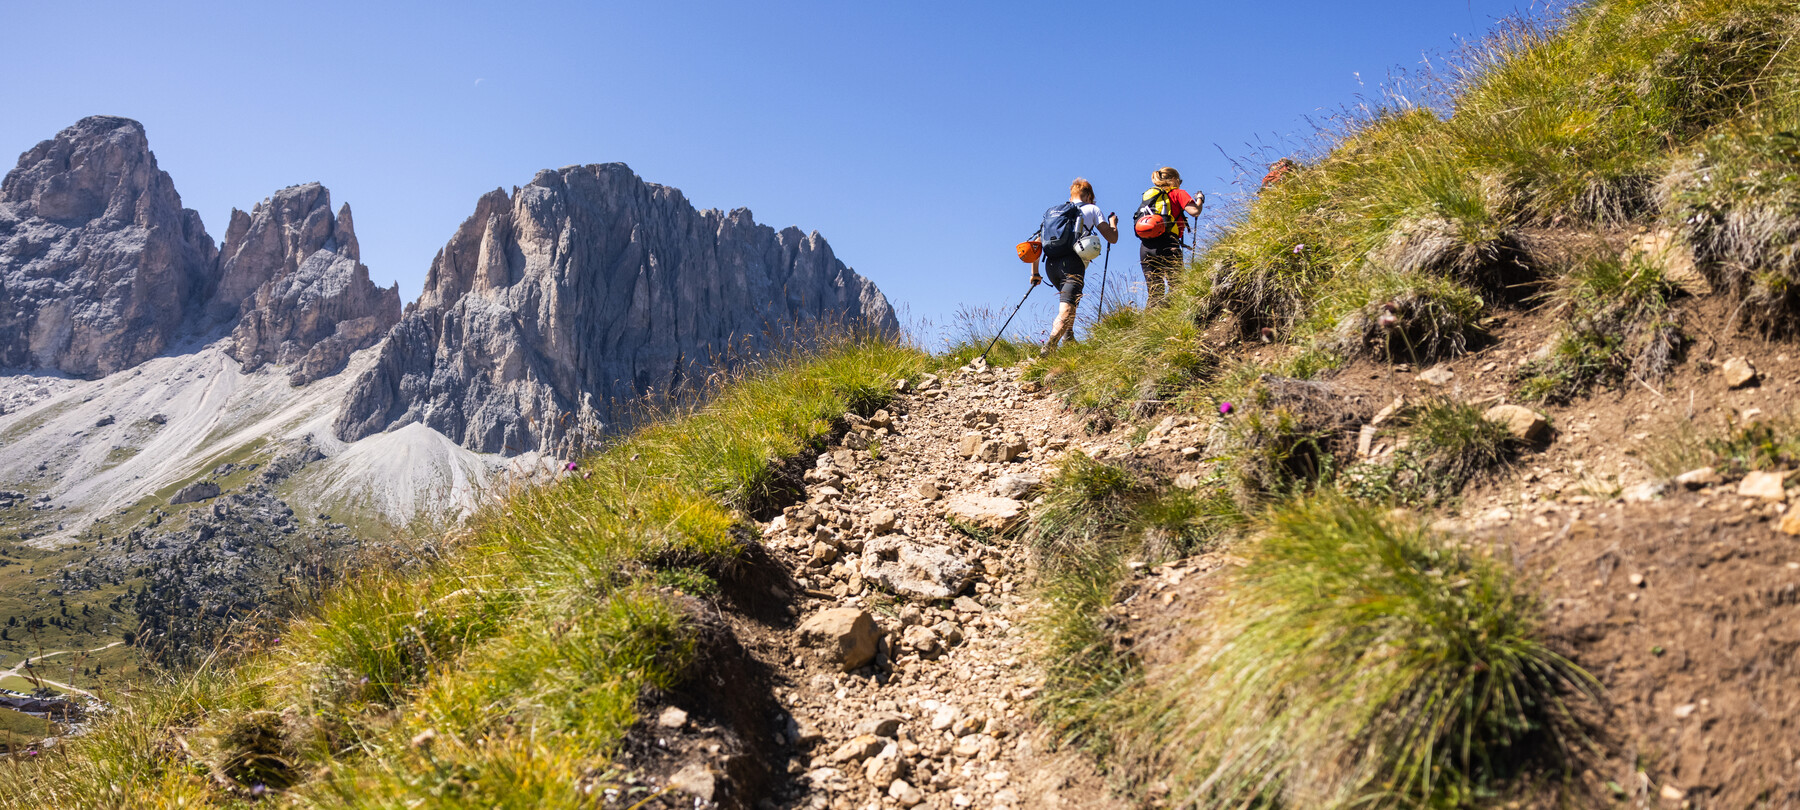 Caution in the mountains: advice for trekking adventures